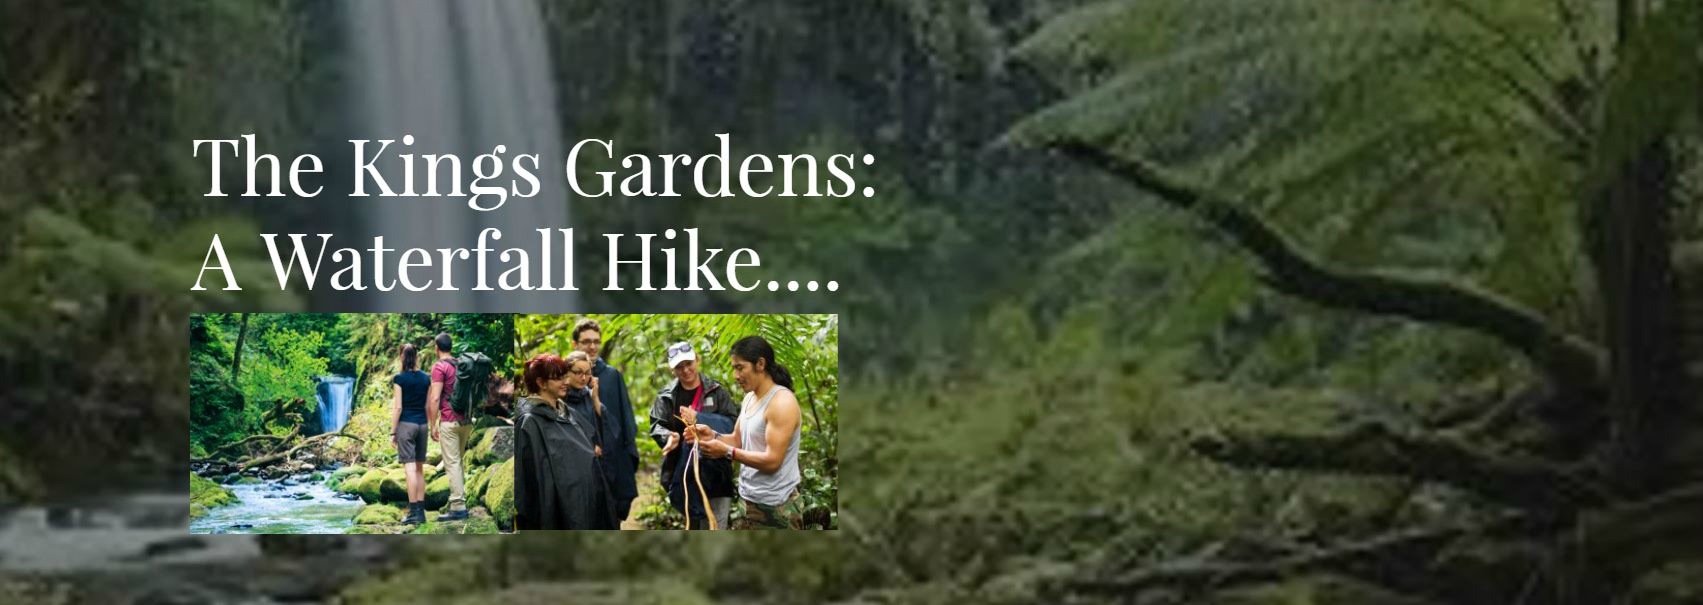 Invitation to Visit The Kings Gardens on Maui